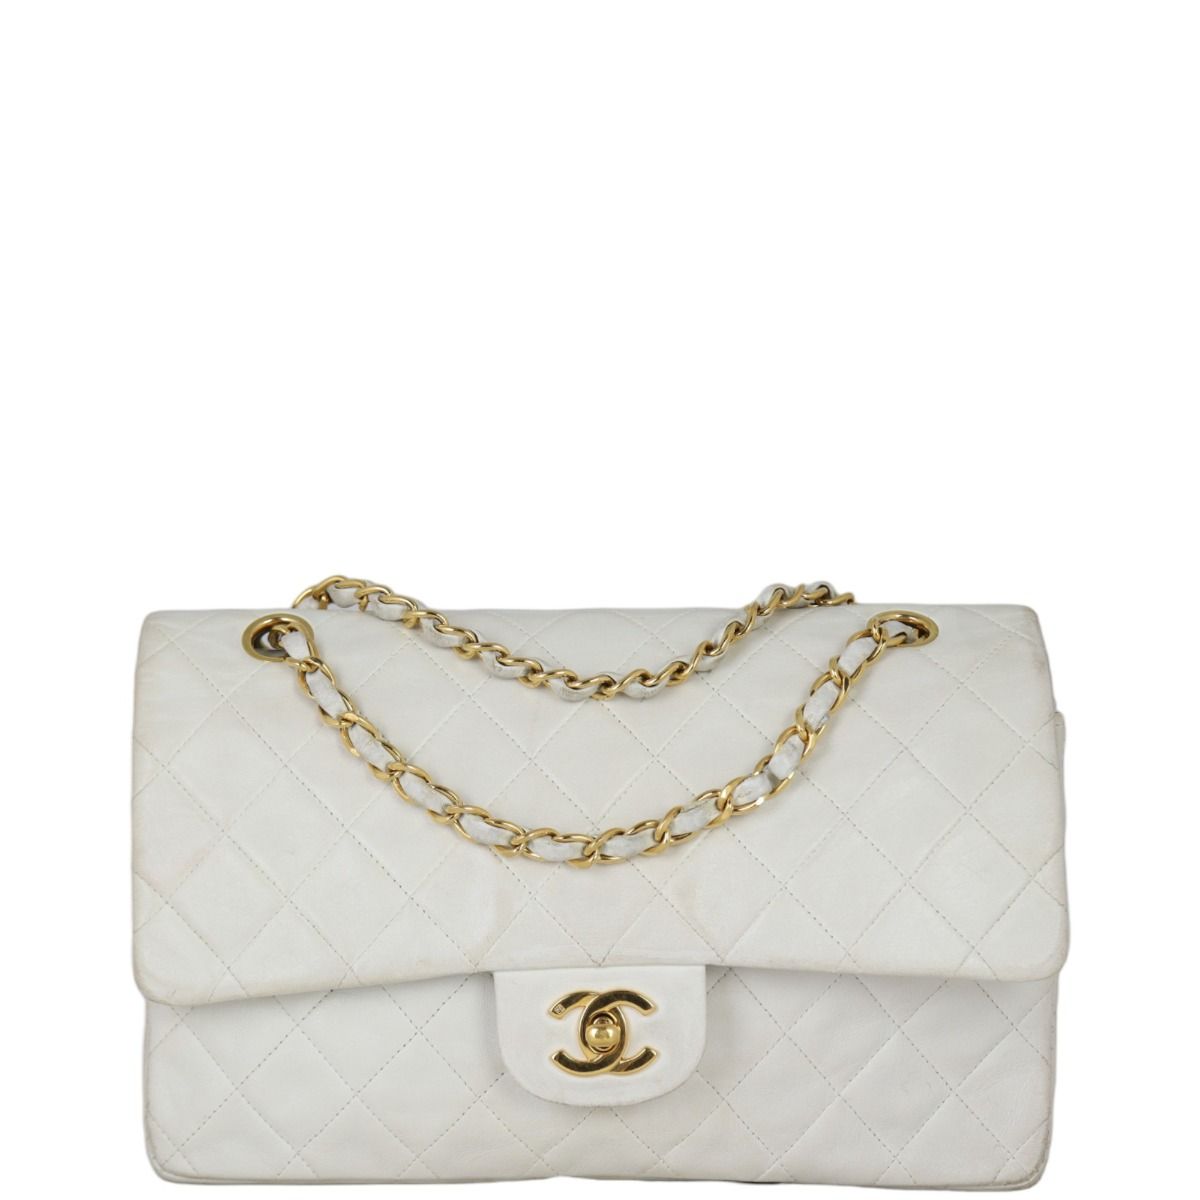 Timeless / Classic Jumbo Vintage bag in white leather